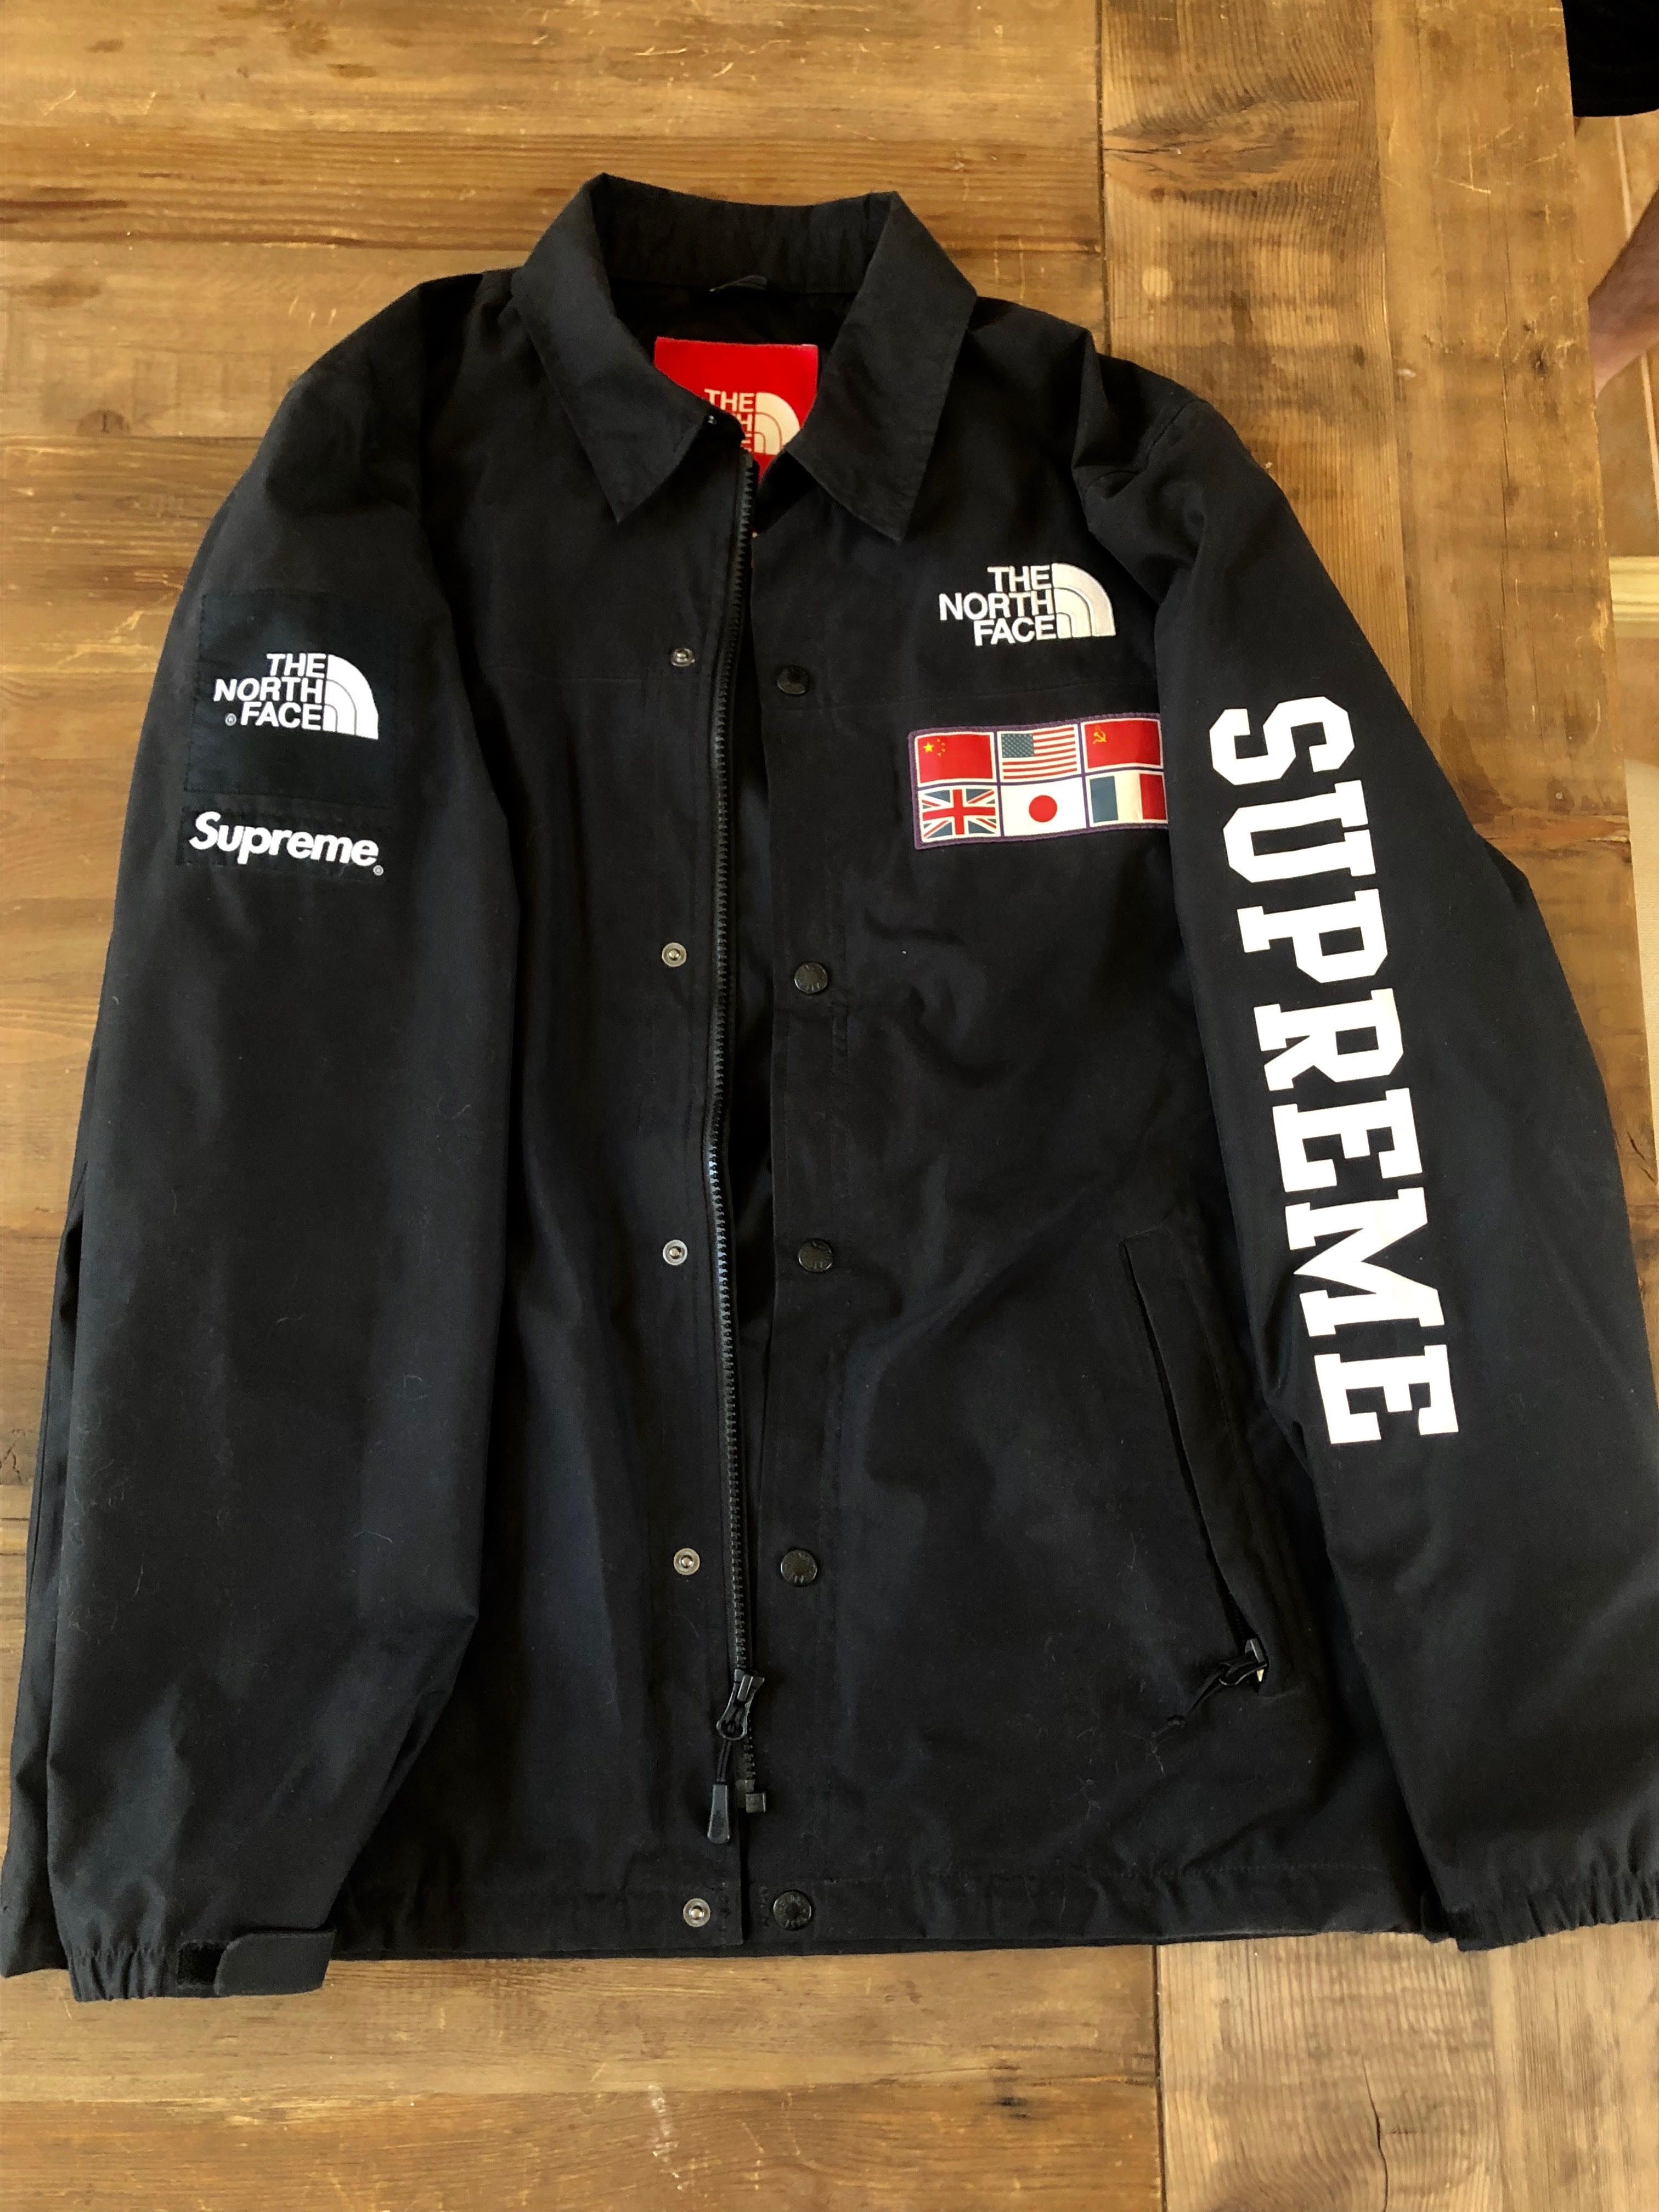 Supreme TNF Expedition Coaches Flags Jacket | Grailed